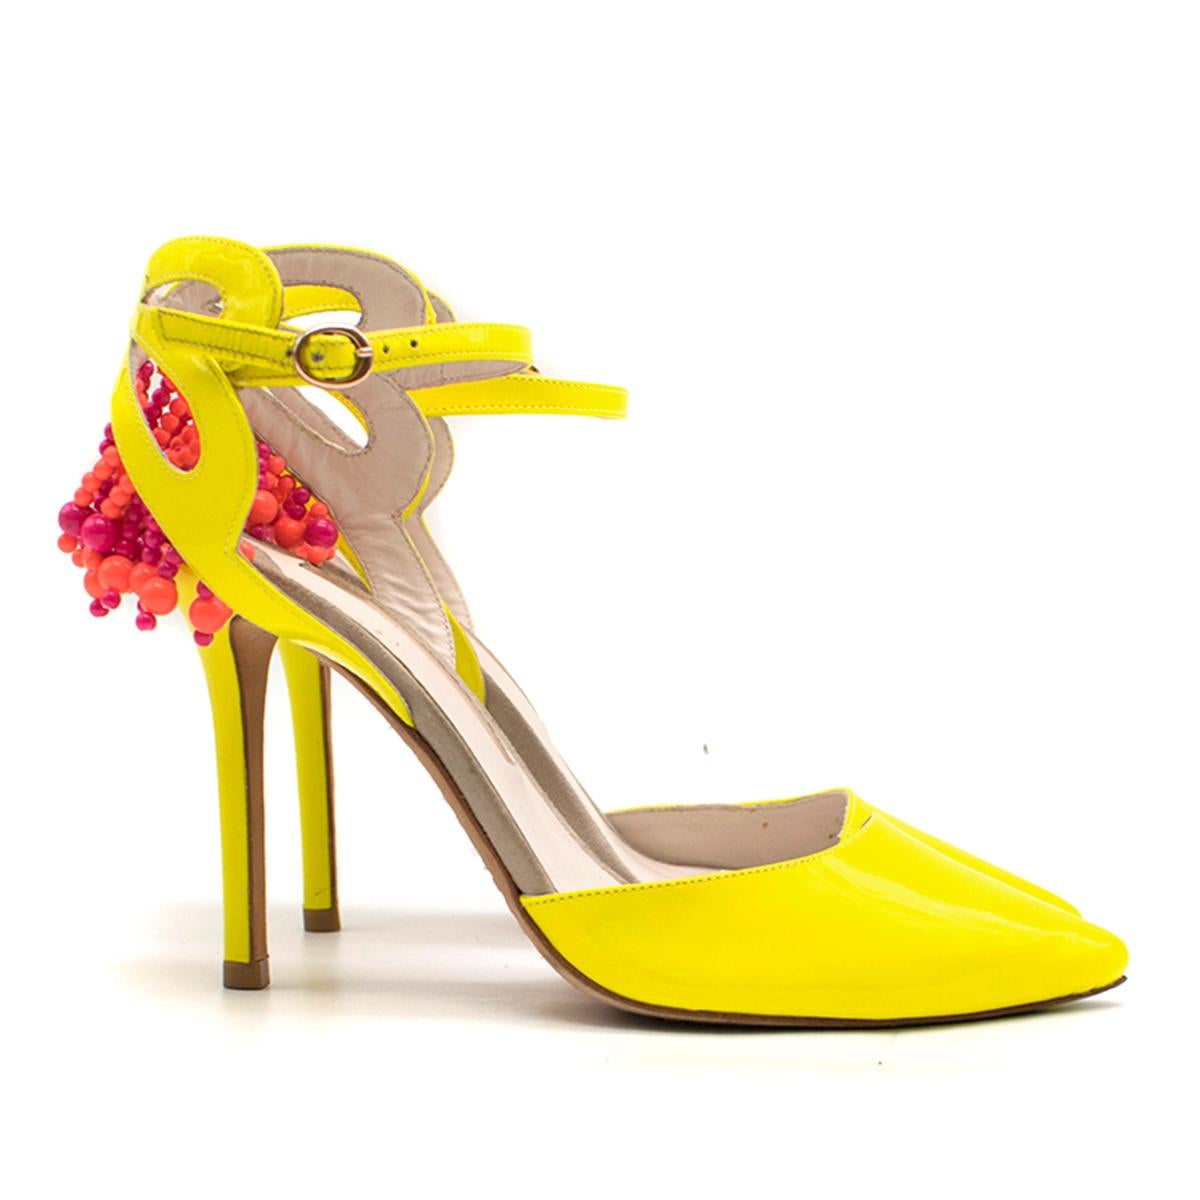 Sophia Webster Amina Patent Leather Beaded Pumps

- Bright yellow leather patent pumps
- Stiletto heel
- Leather cut-out to the inner sides
- Pointy toe
- Ankle buckle strap 
- Heel cutouts with beaded embellishment

Please note, these items are